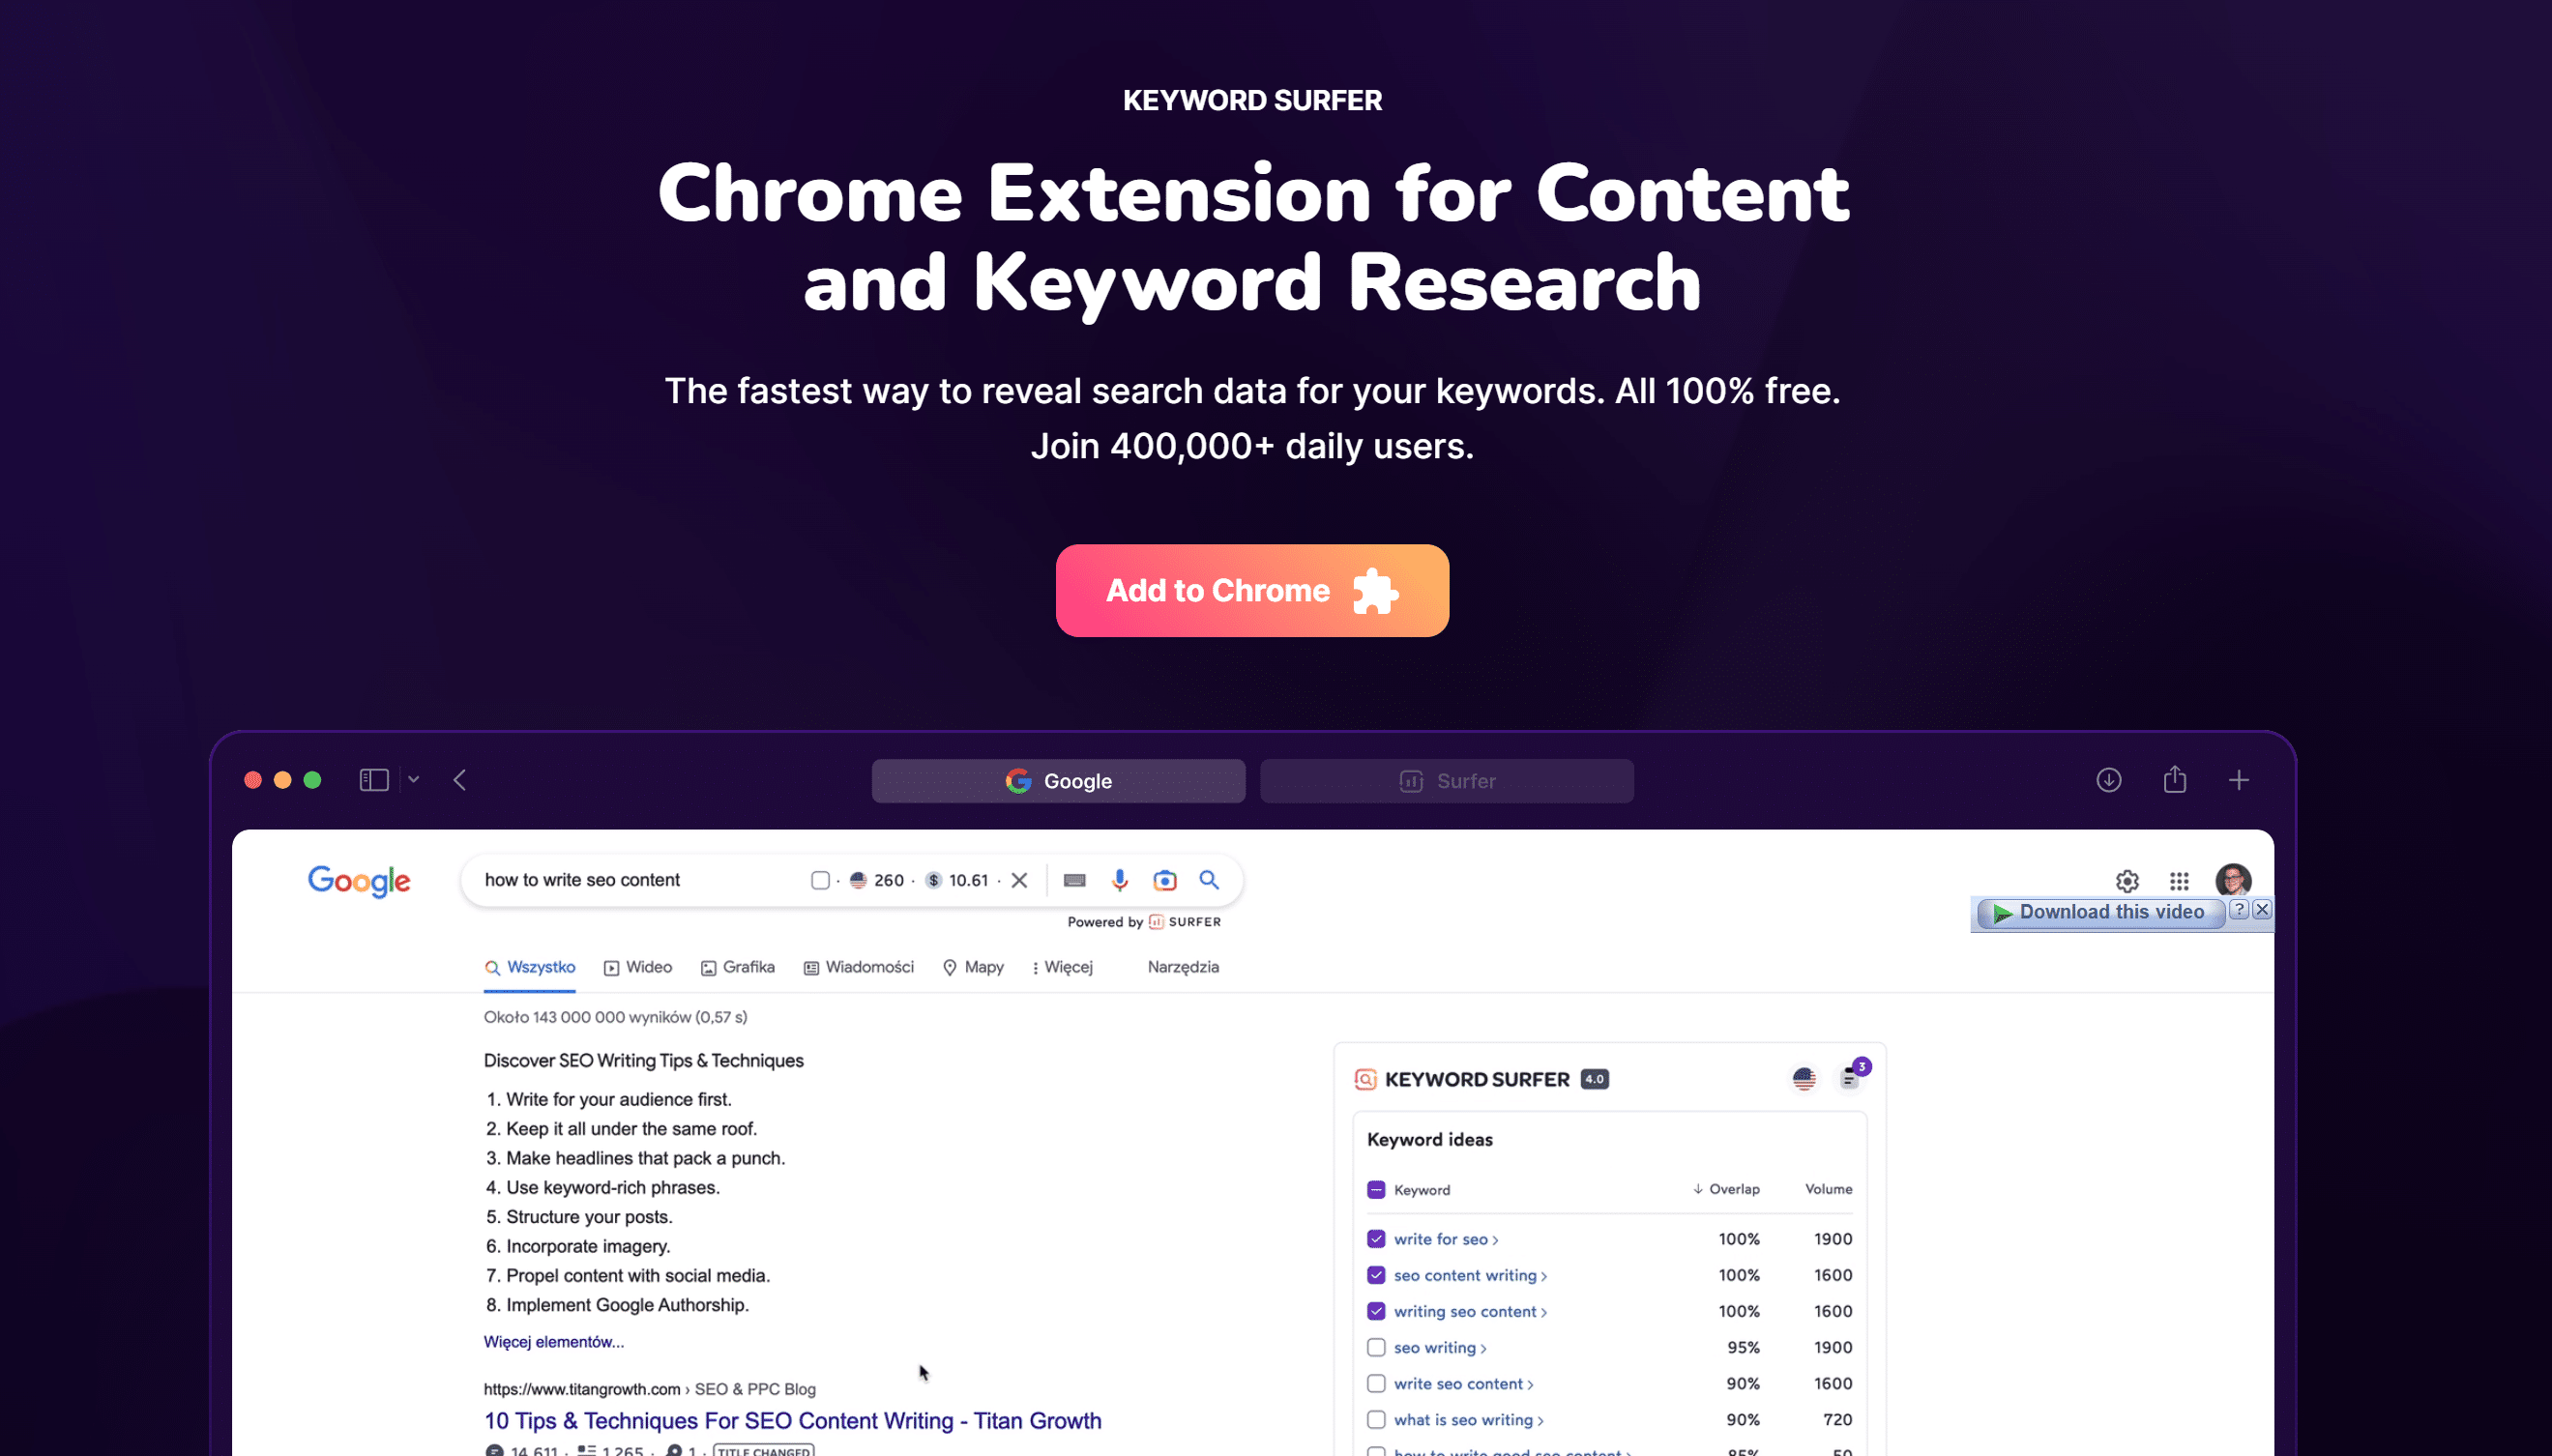 Keyword Research With Surfer: 2 Ways For New Keywords 2023